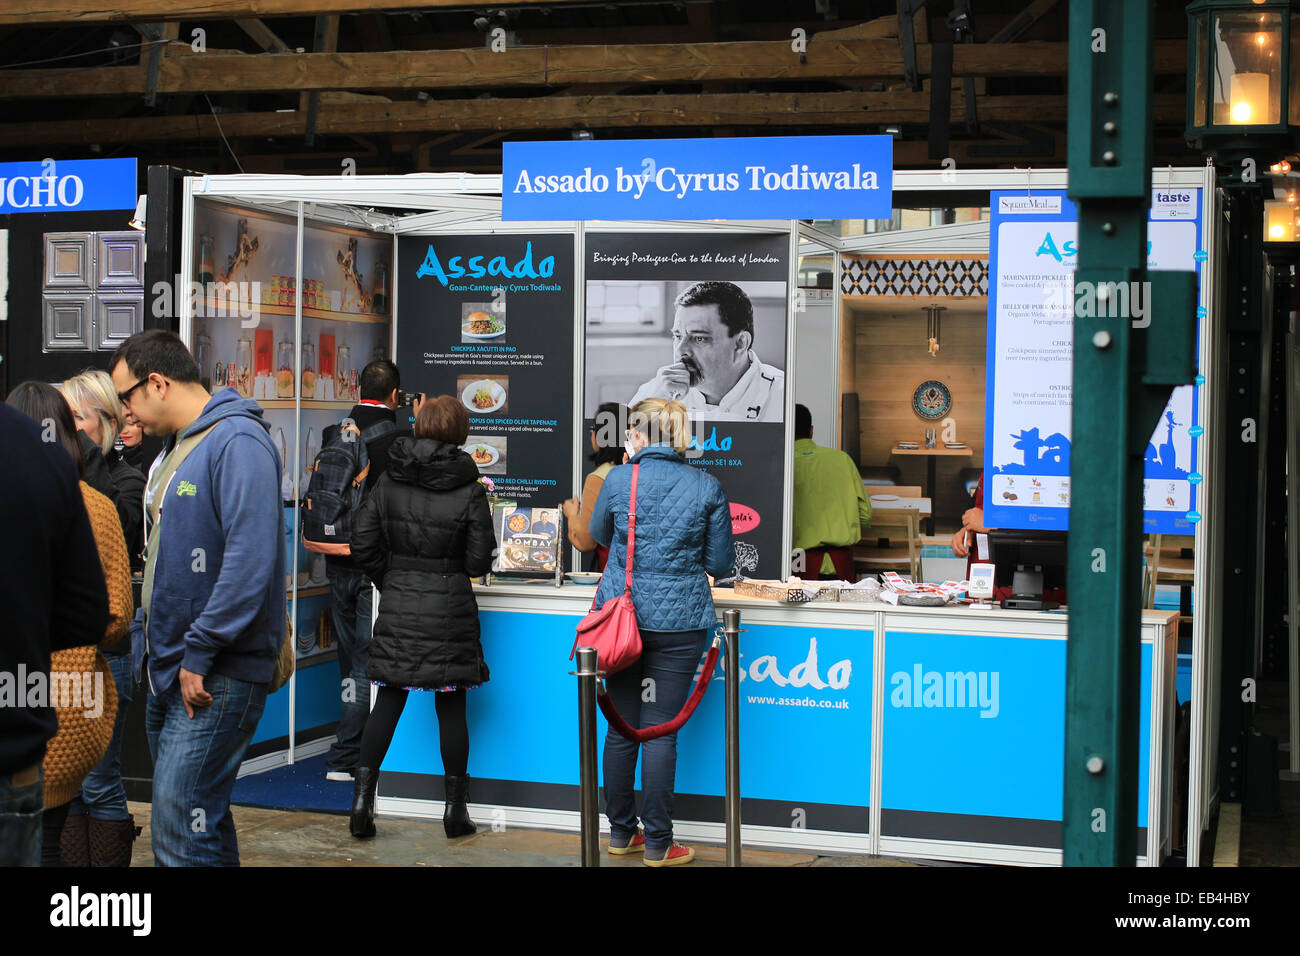 Assado by Cyrus Todiwala food stand at Taste of London Winter, Tobacco Dock,  London Stock Photo - Alamy